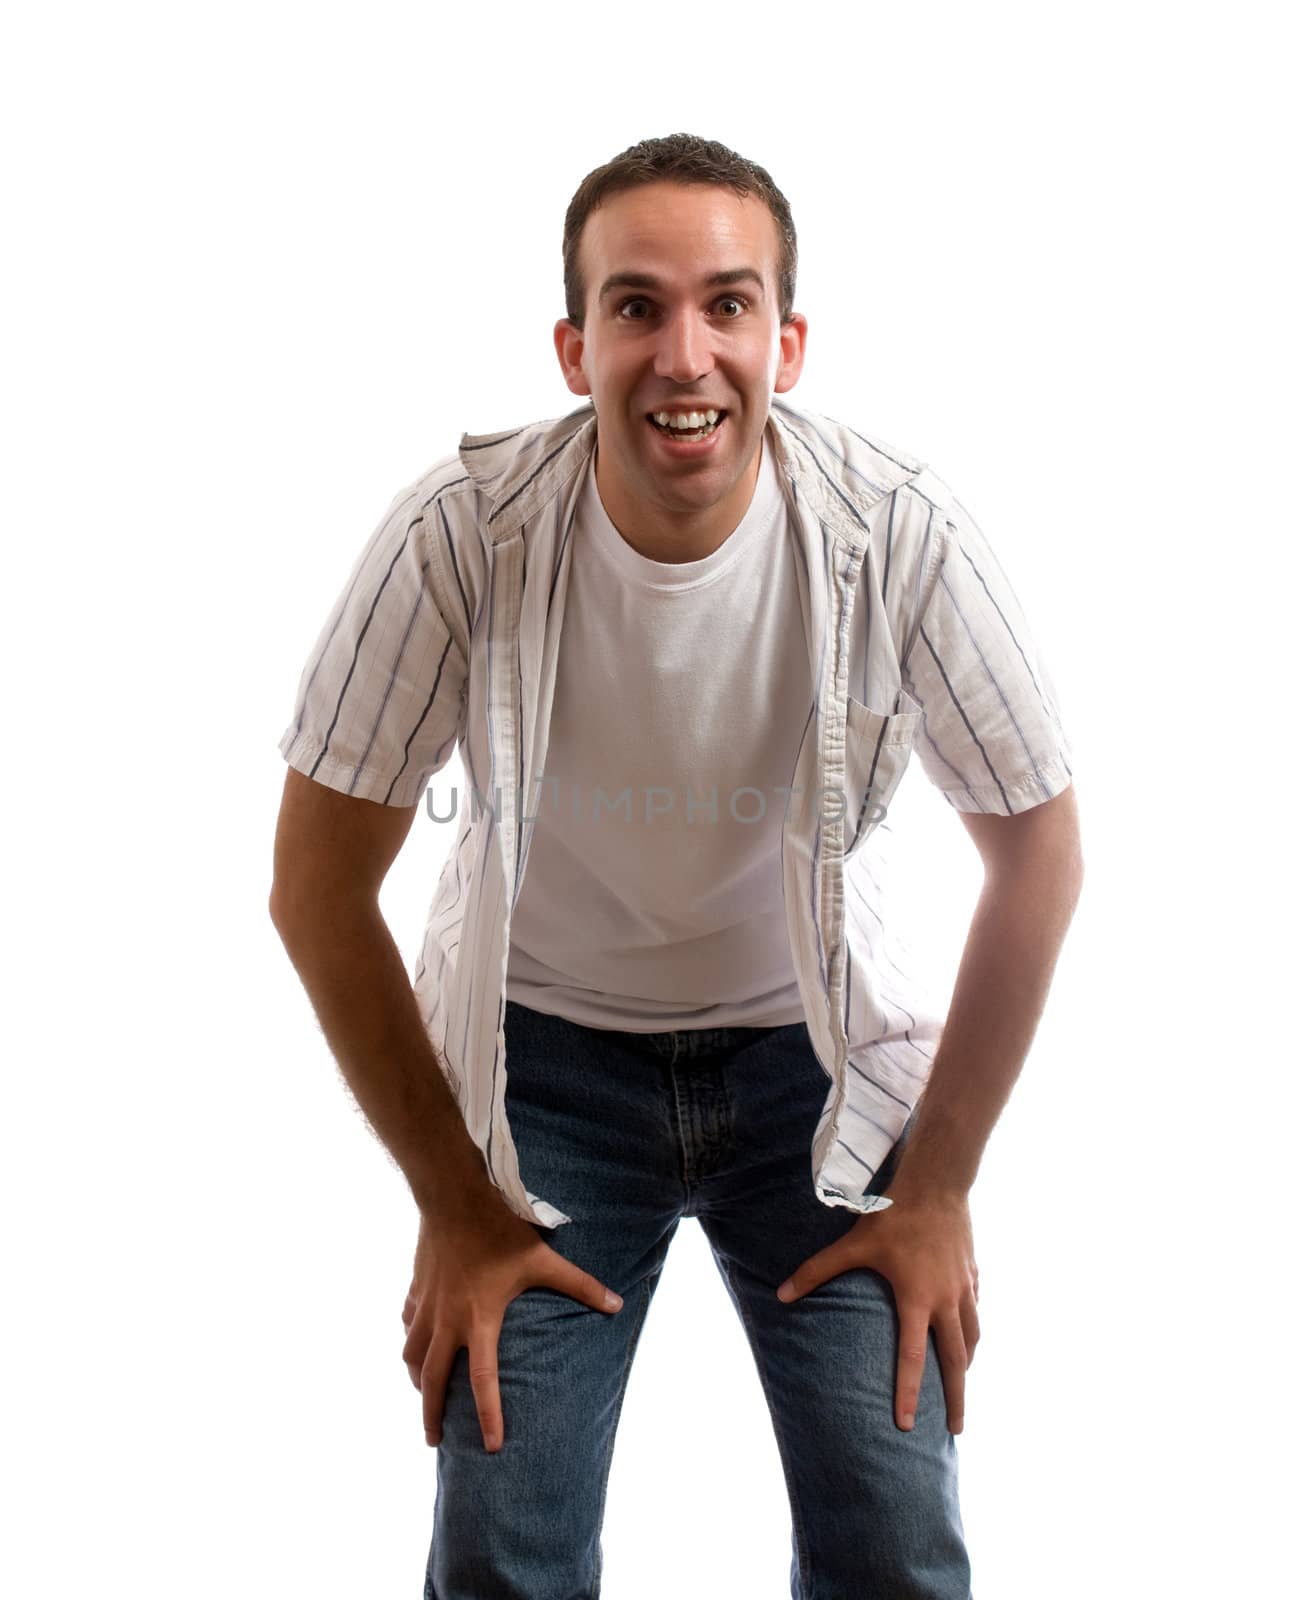 A view of a man bent over smiling taken from a young child's point of view, isolated against a white background